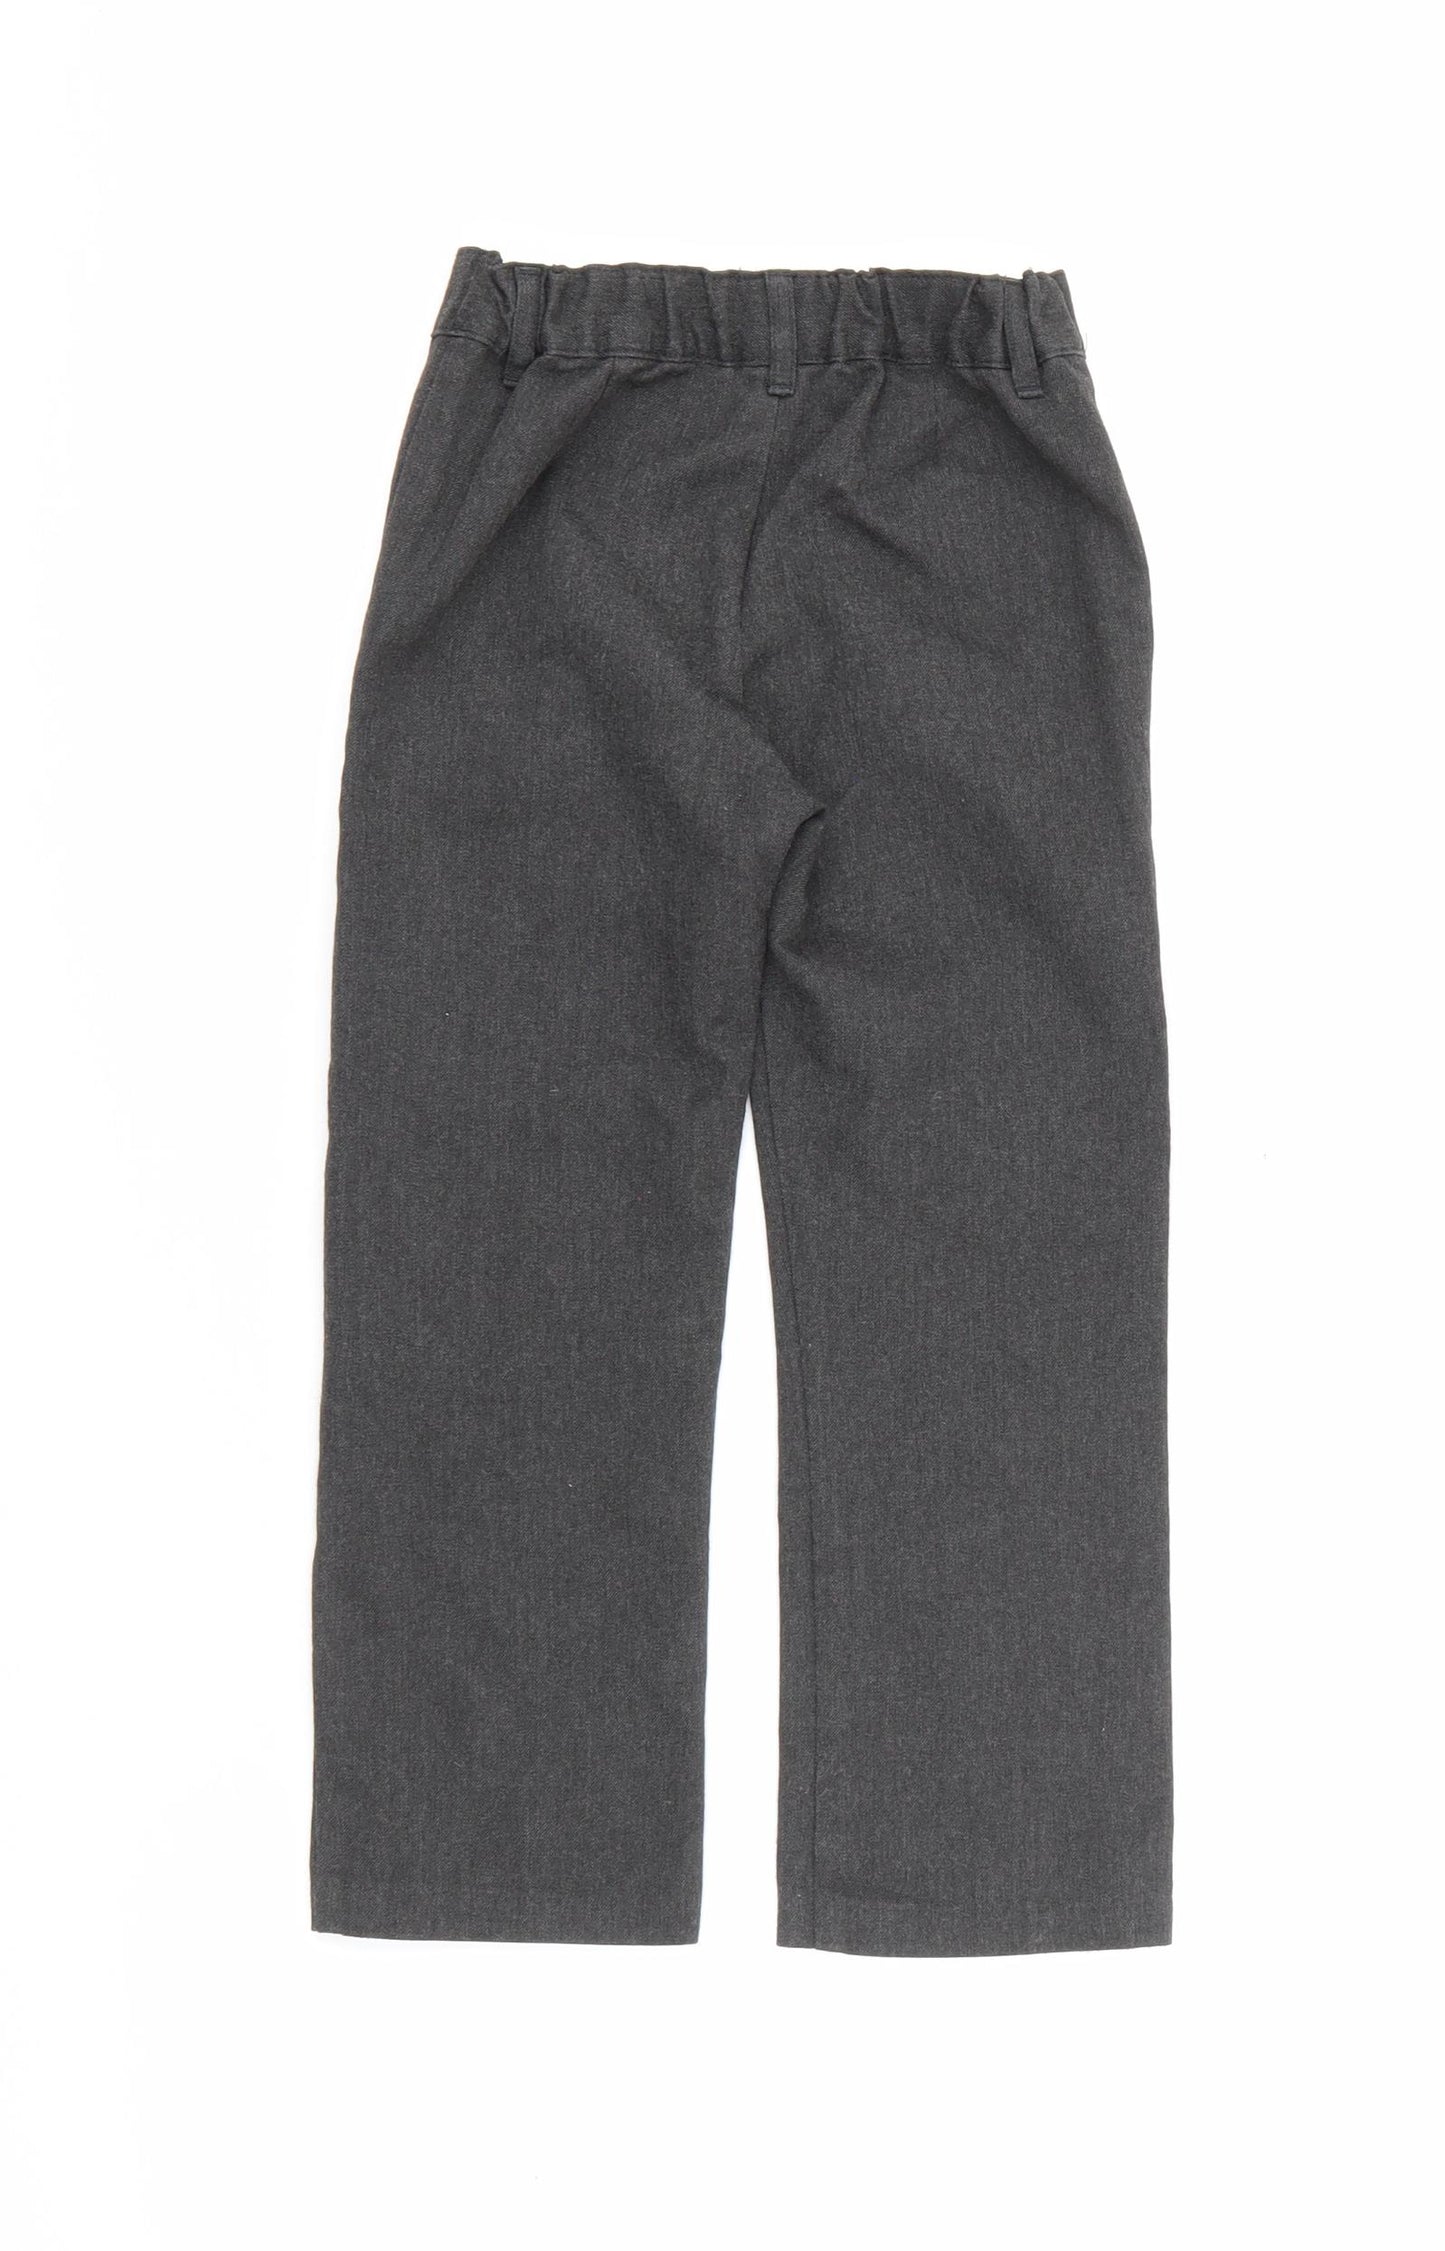 F&F Boys Grey  Polyester Dress Pants Trousers Size 4-5 Years  Regular